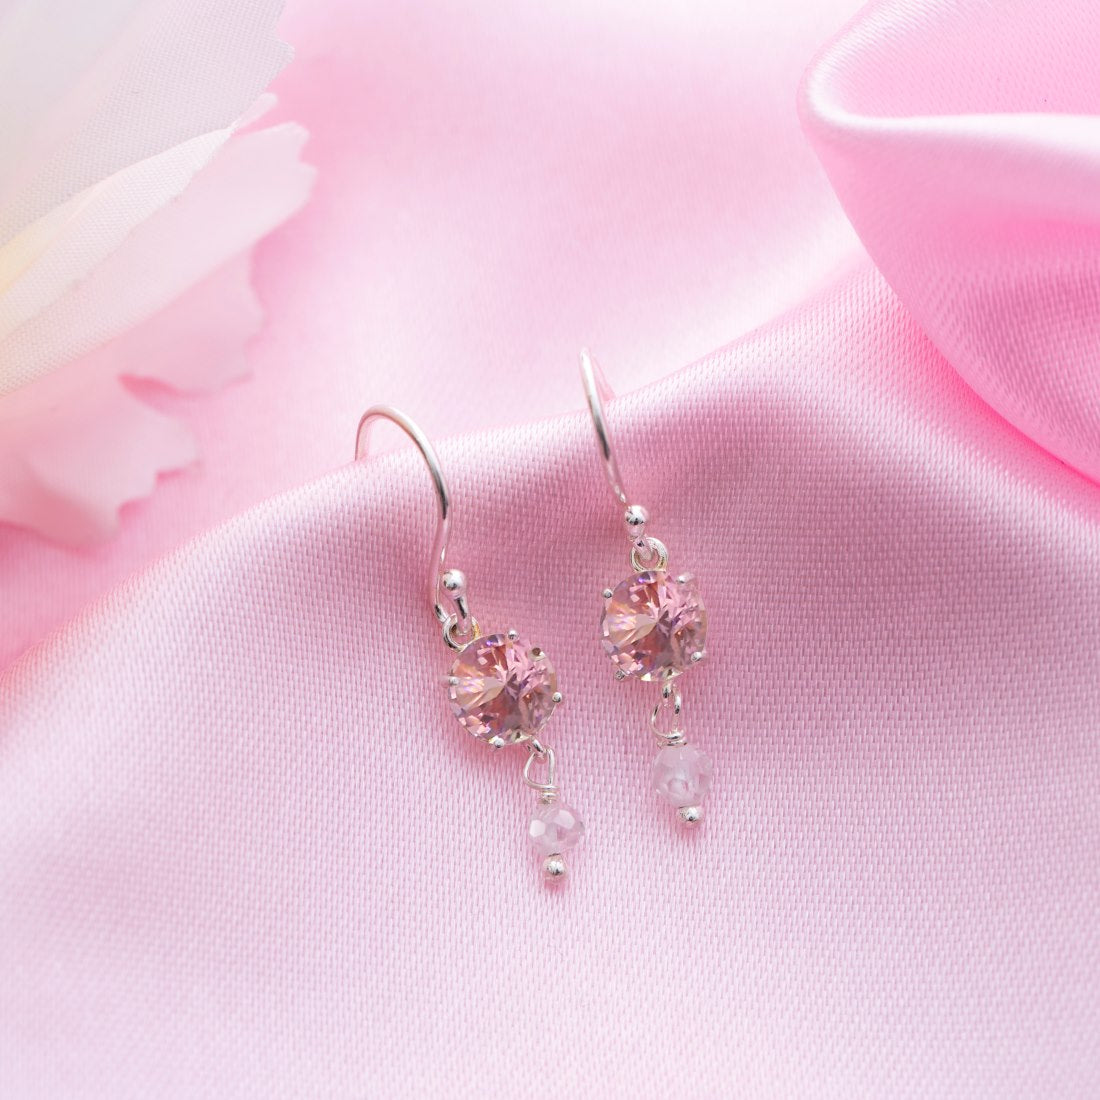 Blush Blossom Radiance Rhodium-Plated CZ 925 Sterling Silver Drop Earrings